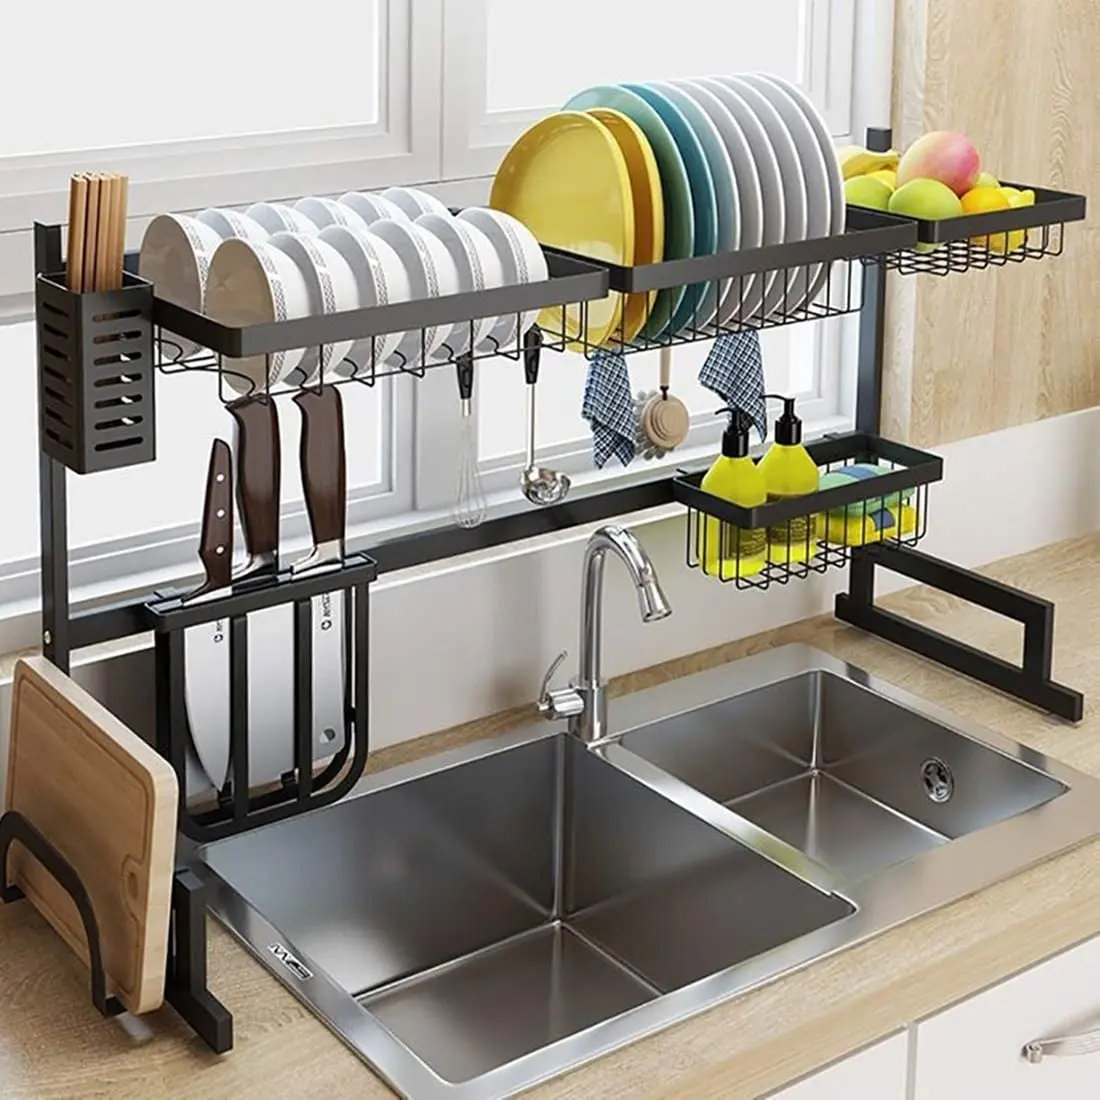 Details about   Over Sink Dish Drying Rack Stainless Steel Cutlery Drainer Kitchen Shelf Large 